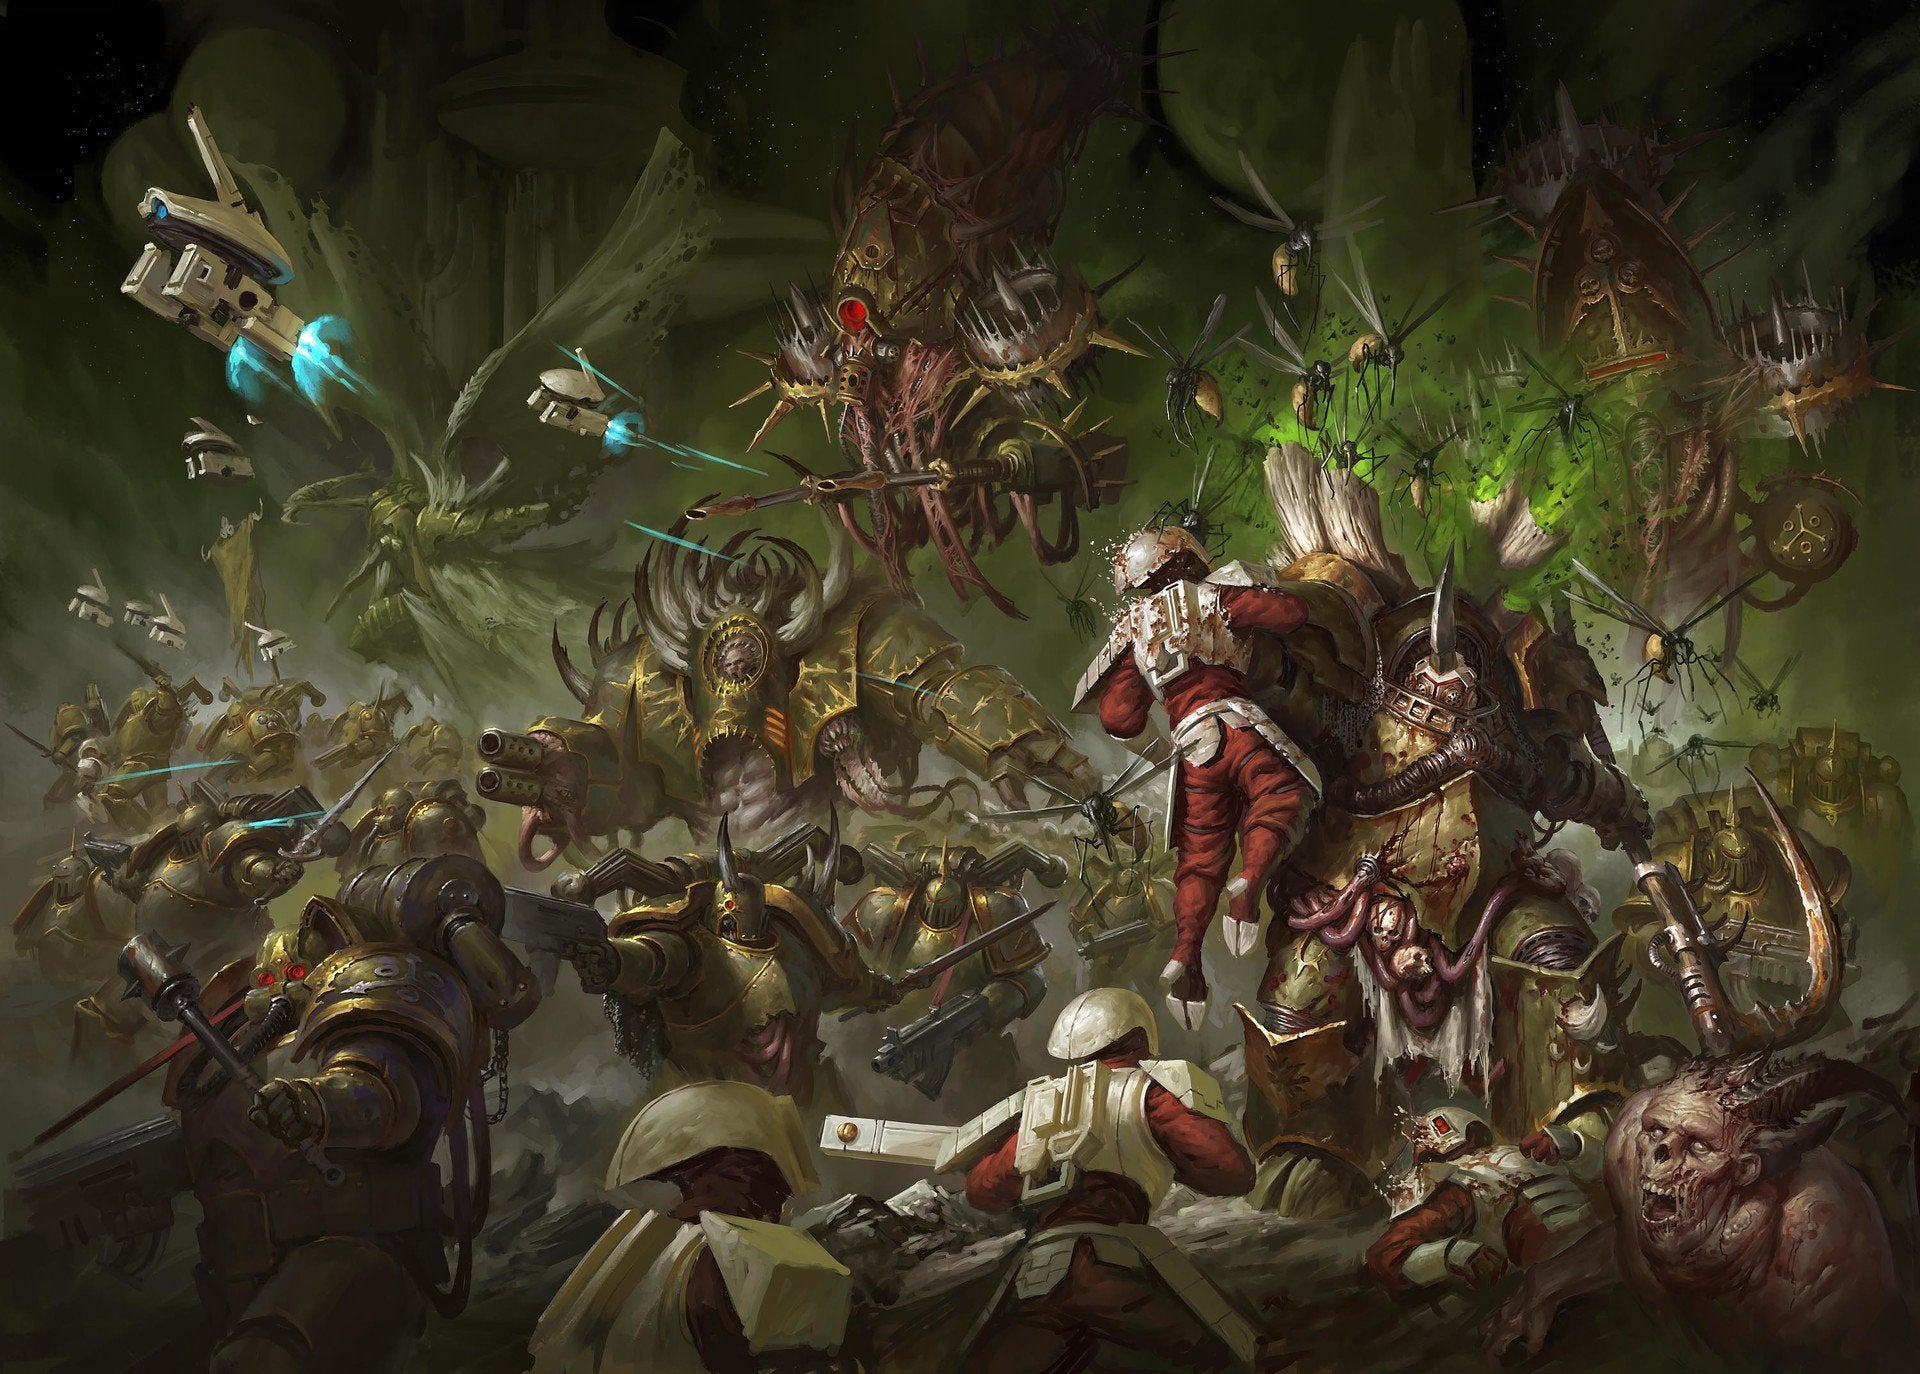 Wanted To Share My Growing Collecting Of Death Guard Image Wallpaper With You Guys